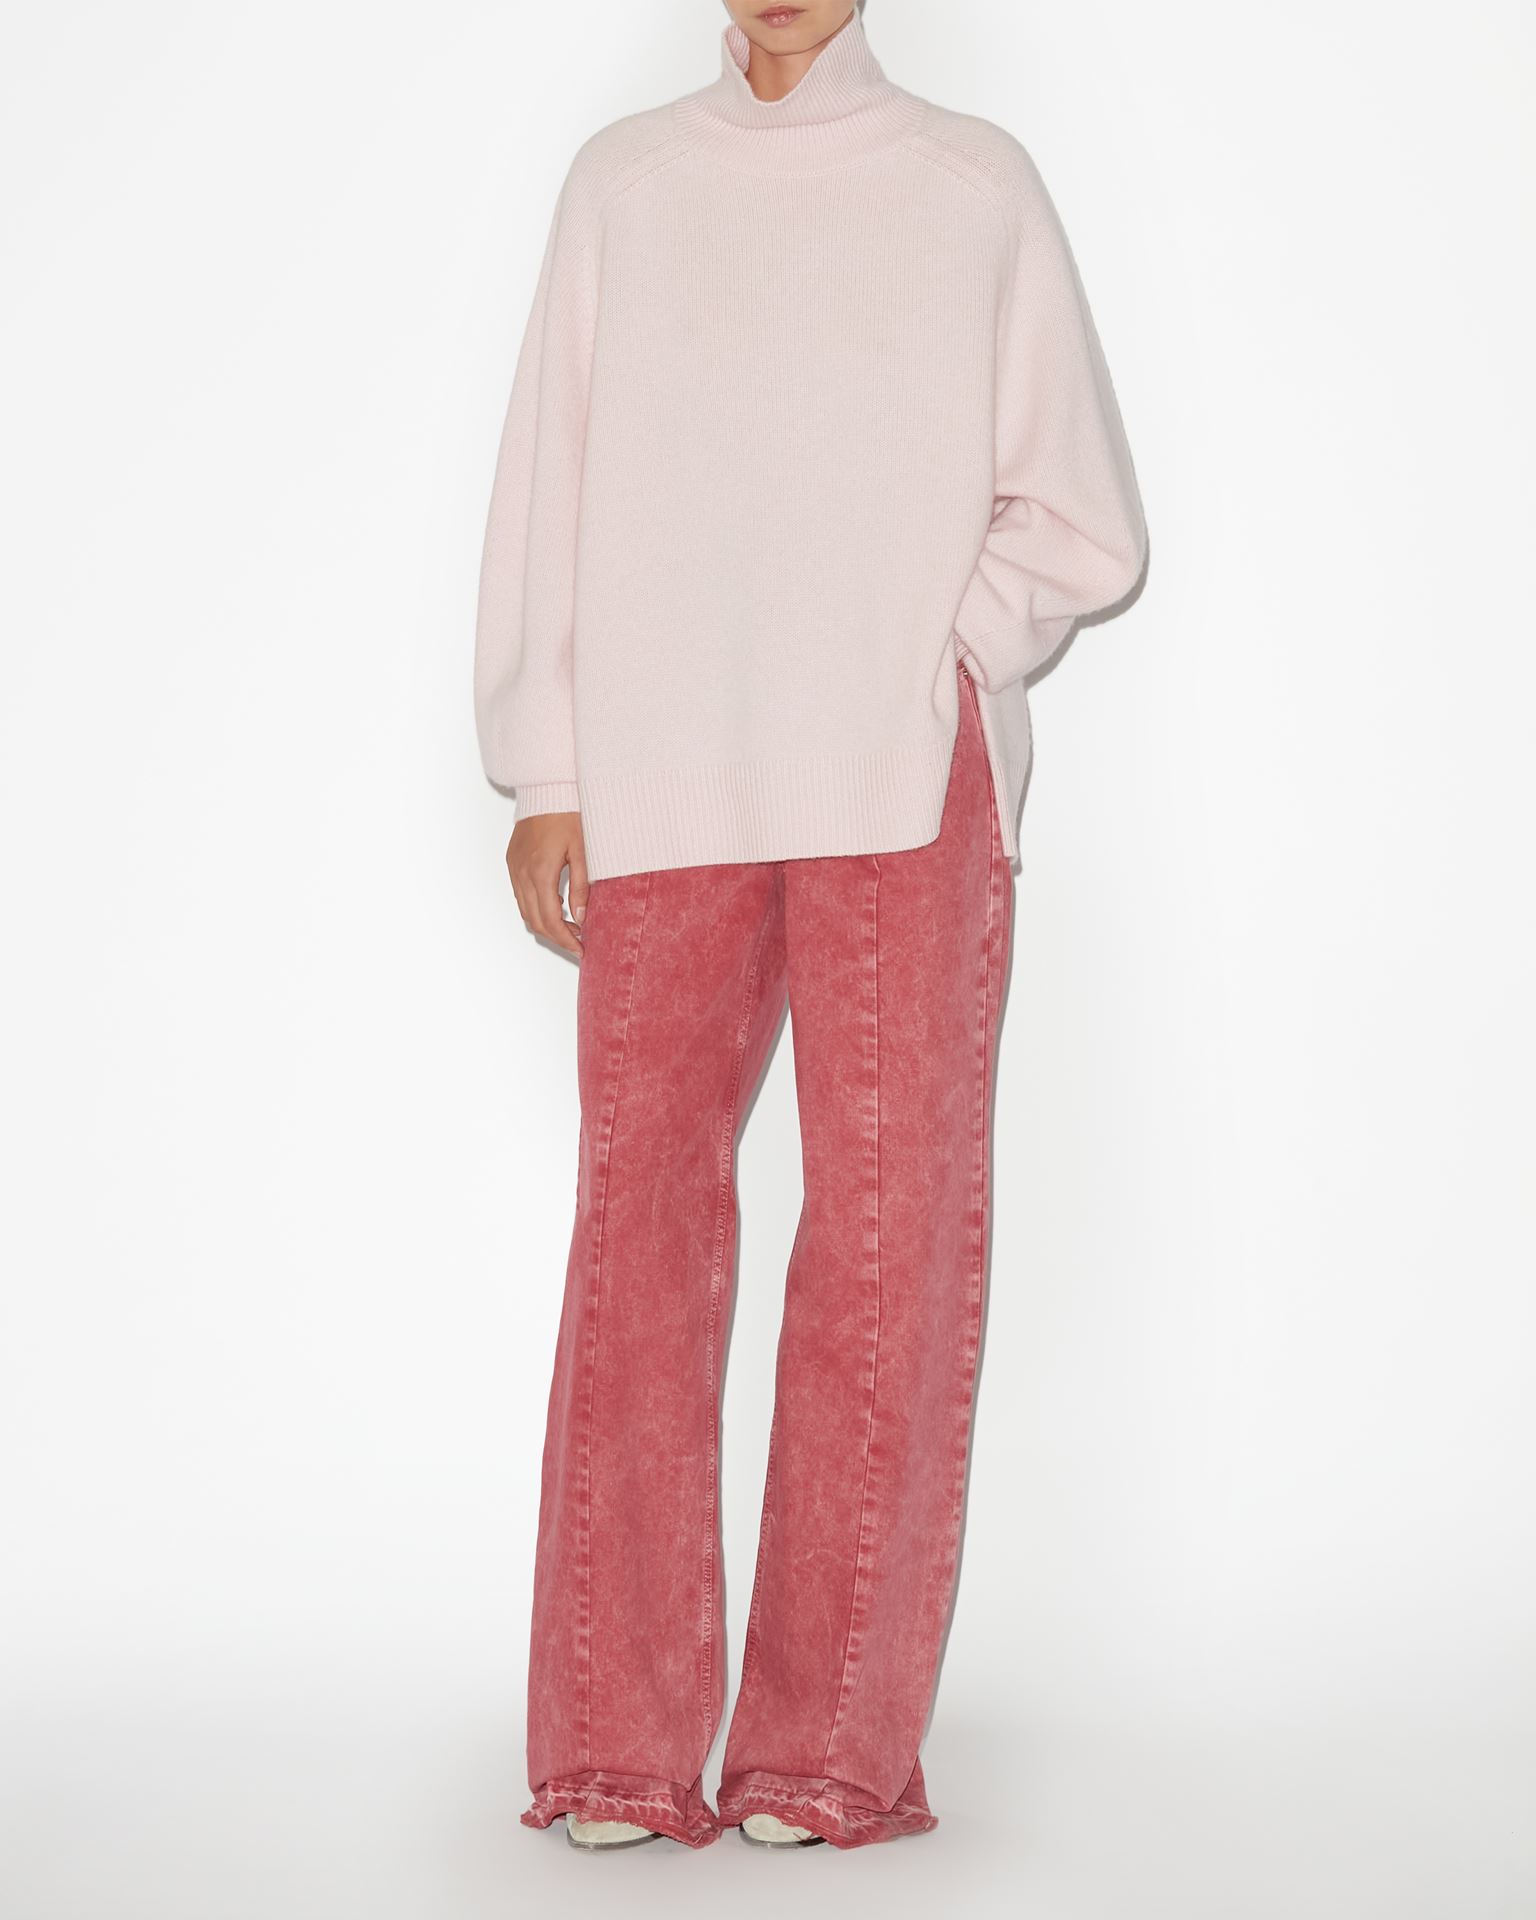 ISABEL MARANT, JERSEY LINELLI - Mujer - Rosa